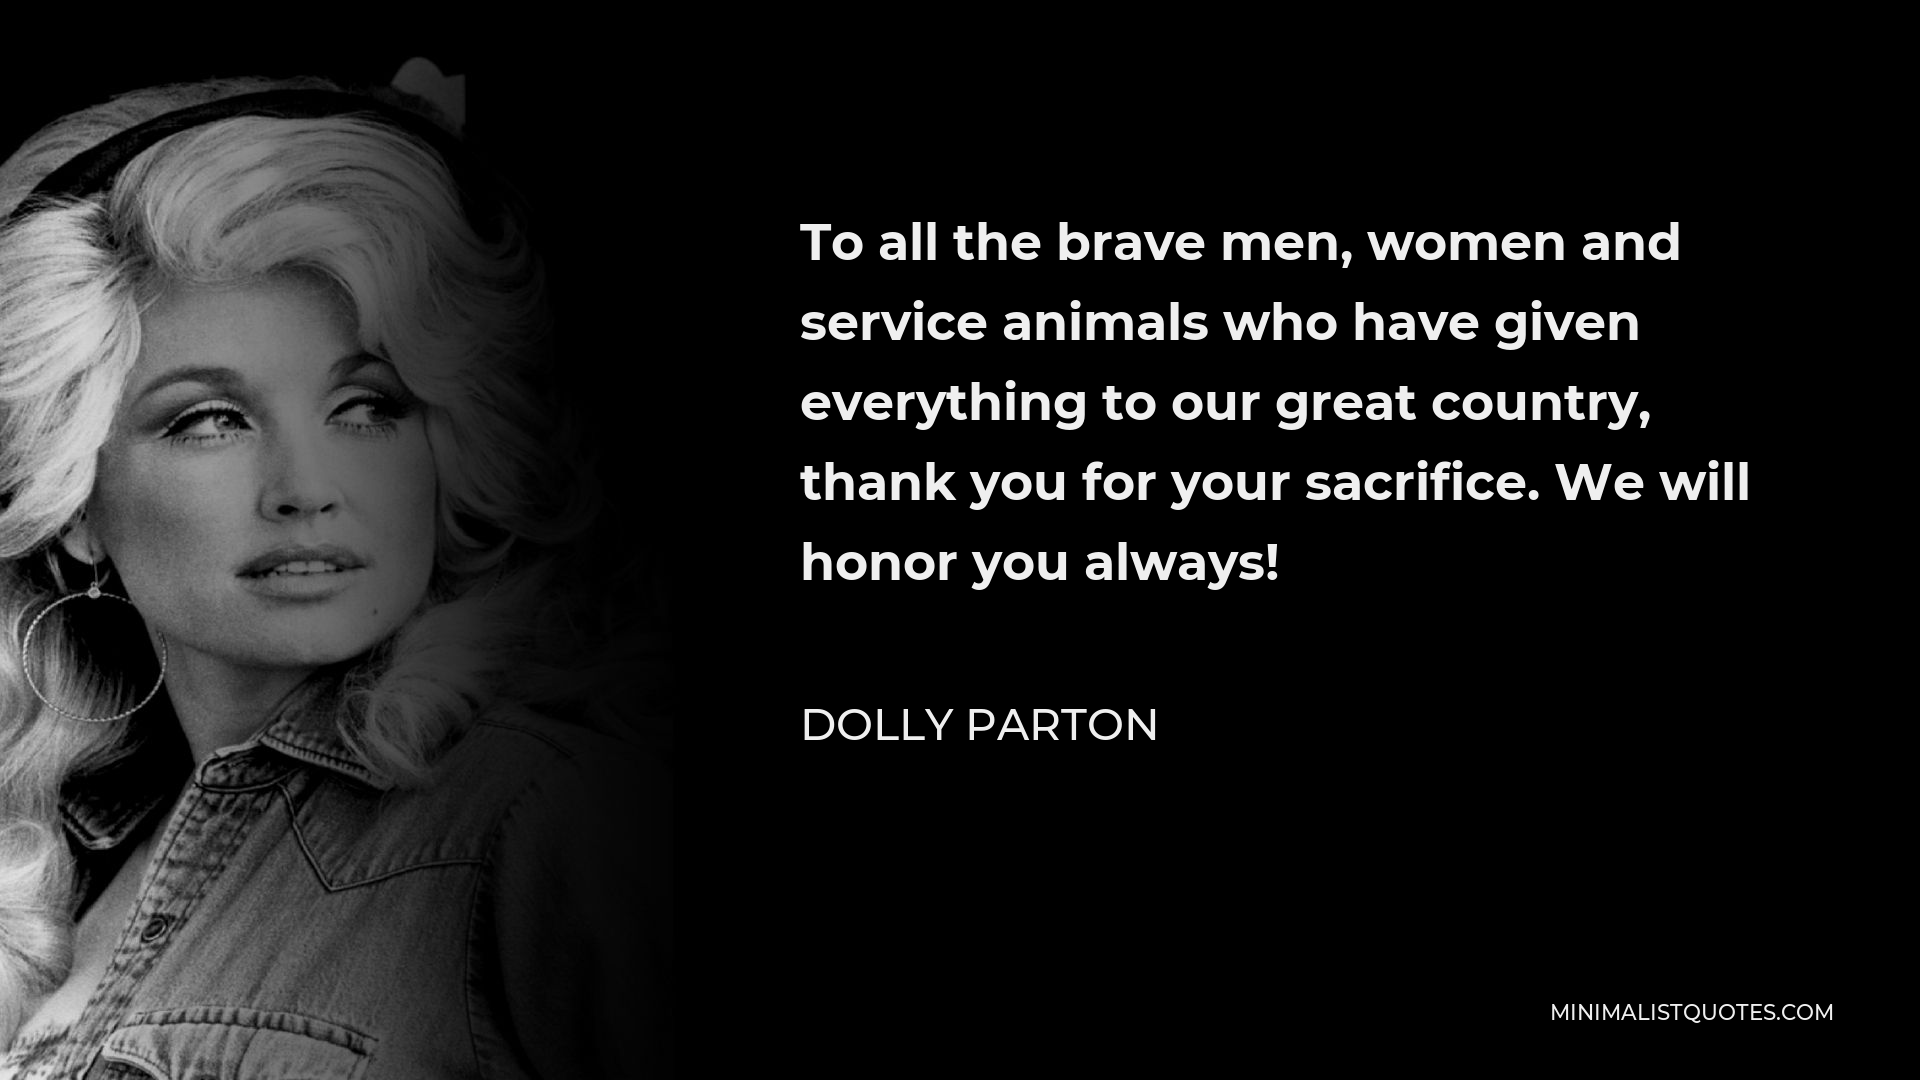 Dolly Parton Quote - To all the brave men, women and service animals who have given everything to our great country, thank you for your sacrifice. We will honor you always!